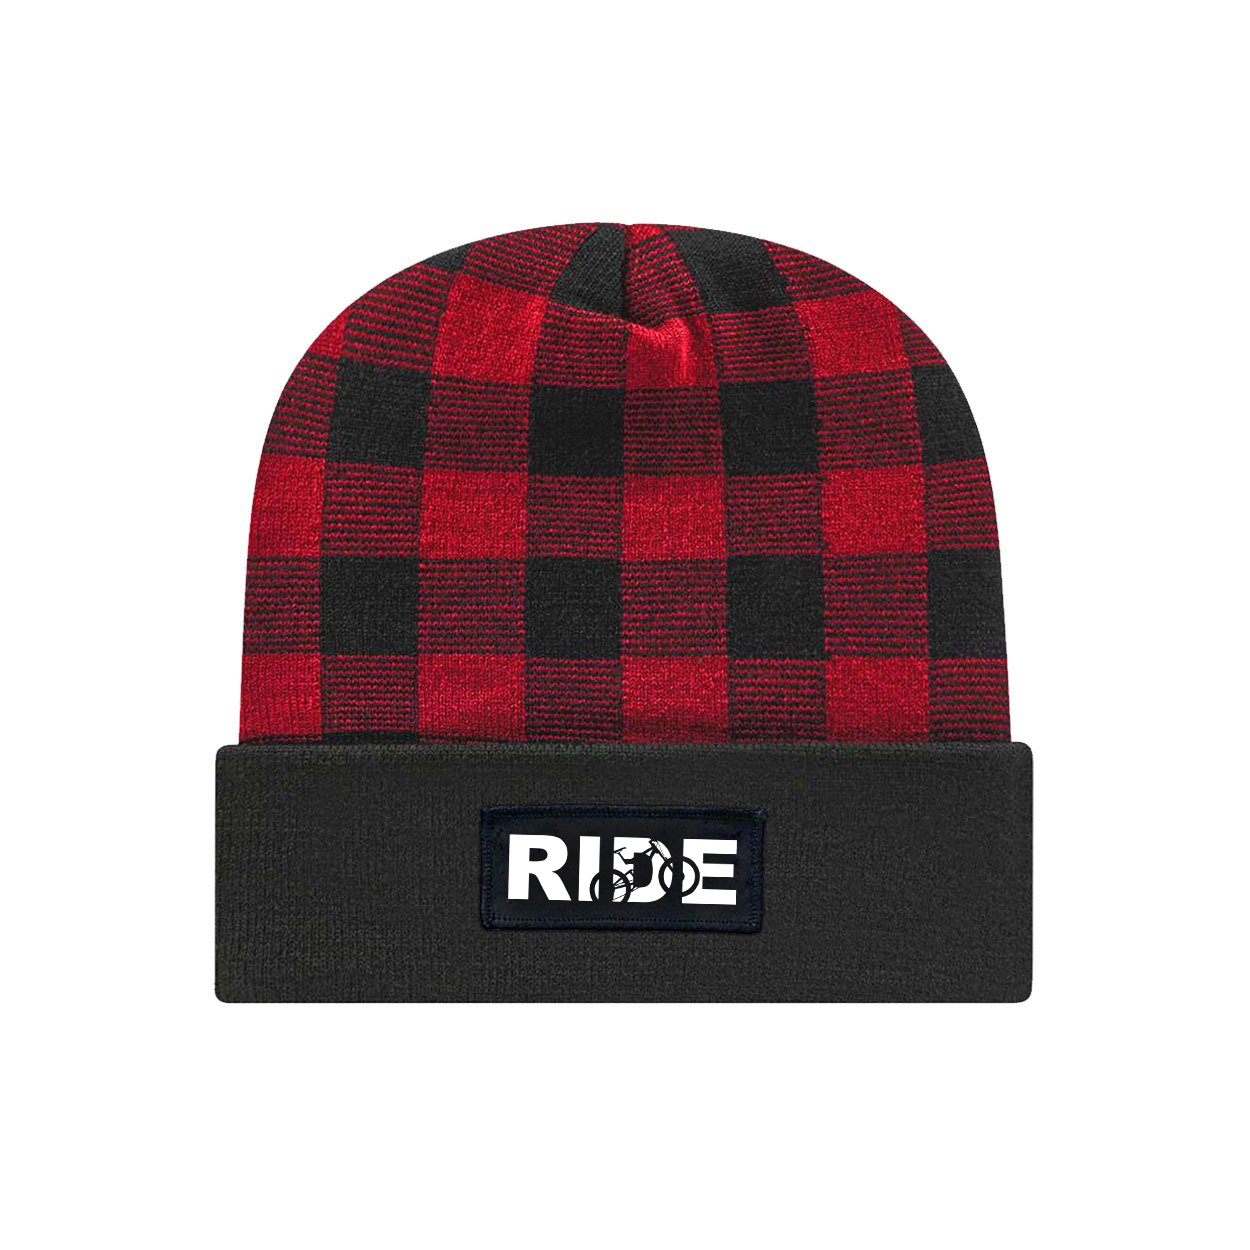 Ride MTB Logo Night Out Woven Patch Roll Up Plaid Beanie Black/True Red (White Logo)